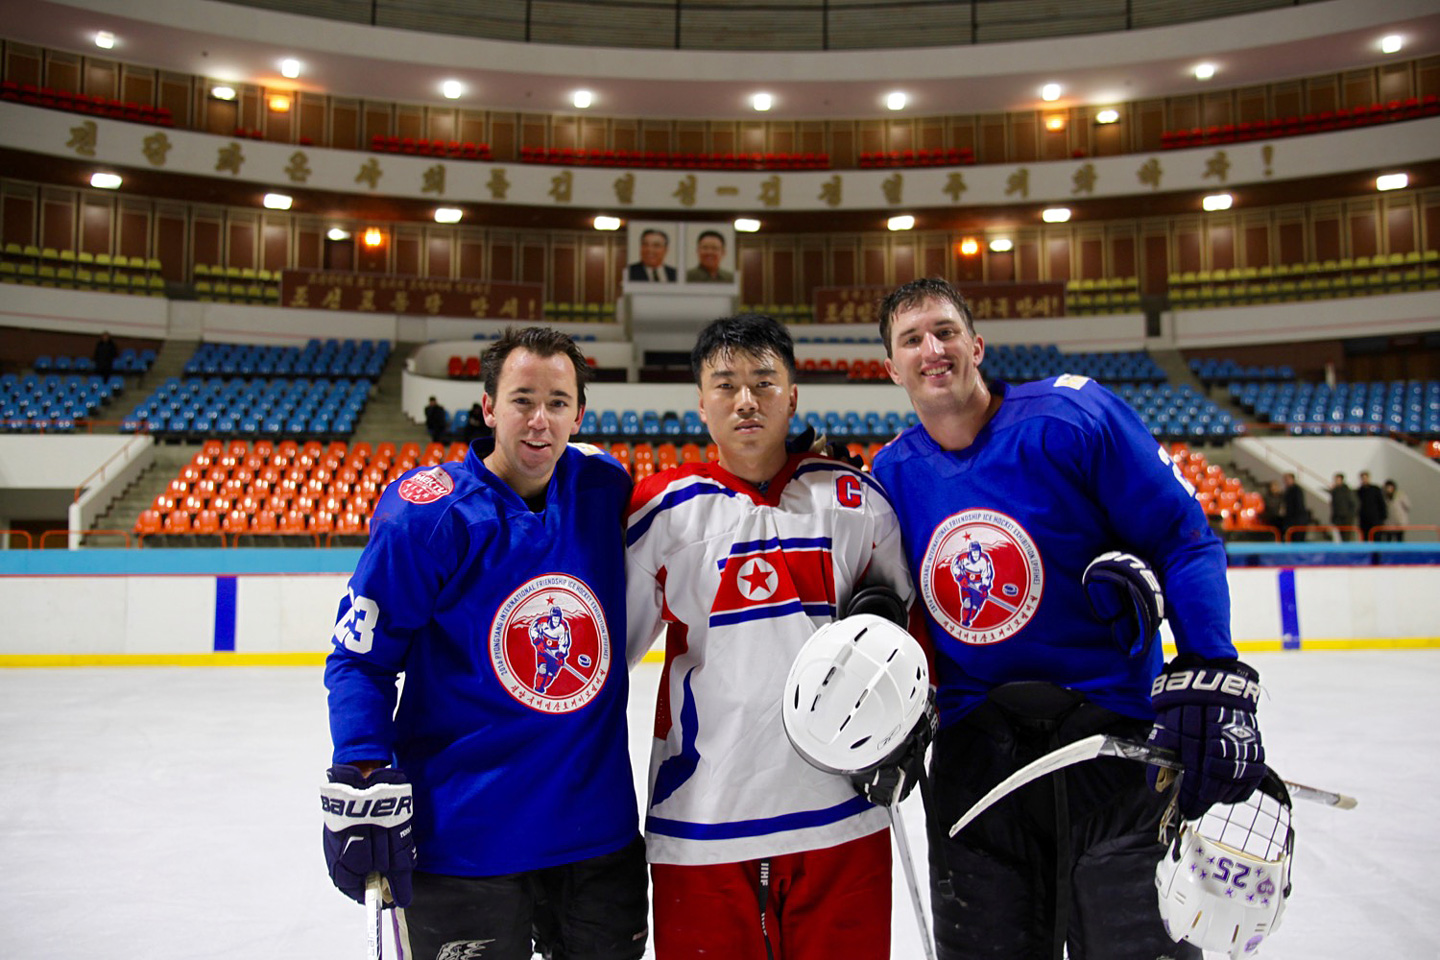 Meet the Westerners Who Played North Koreas National Ice Hockey Team image pic photo